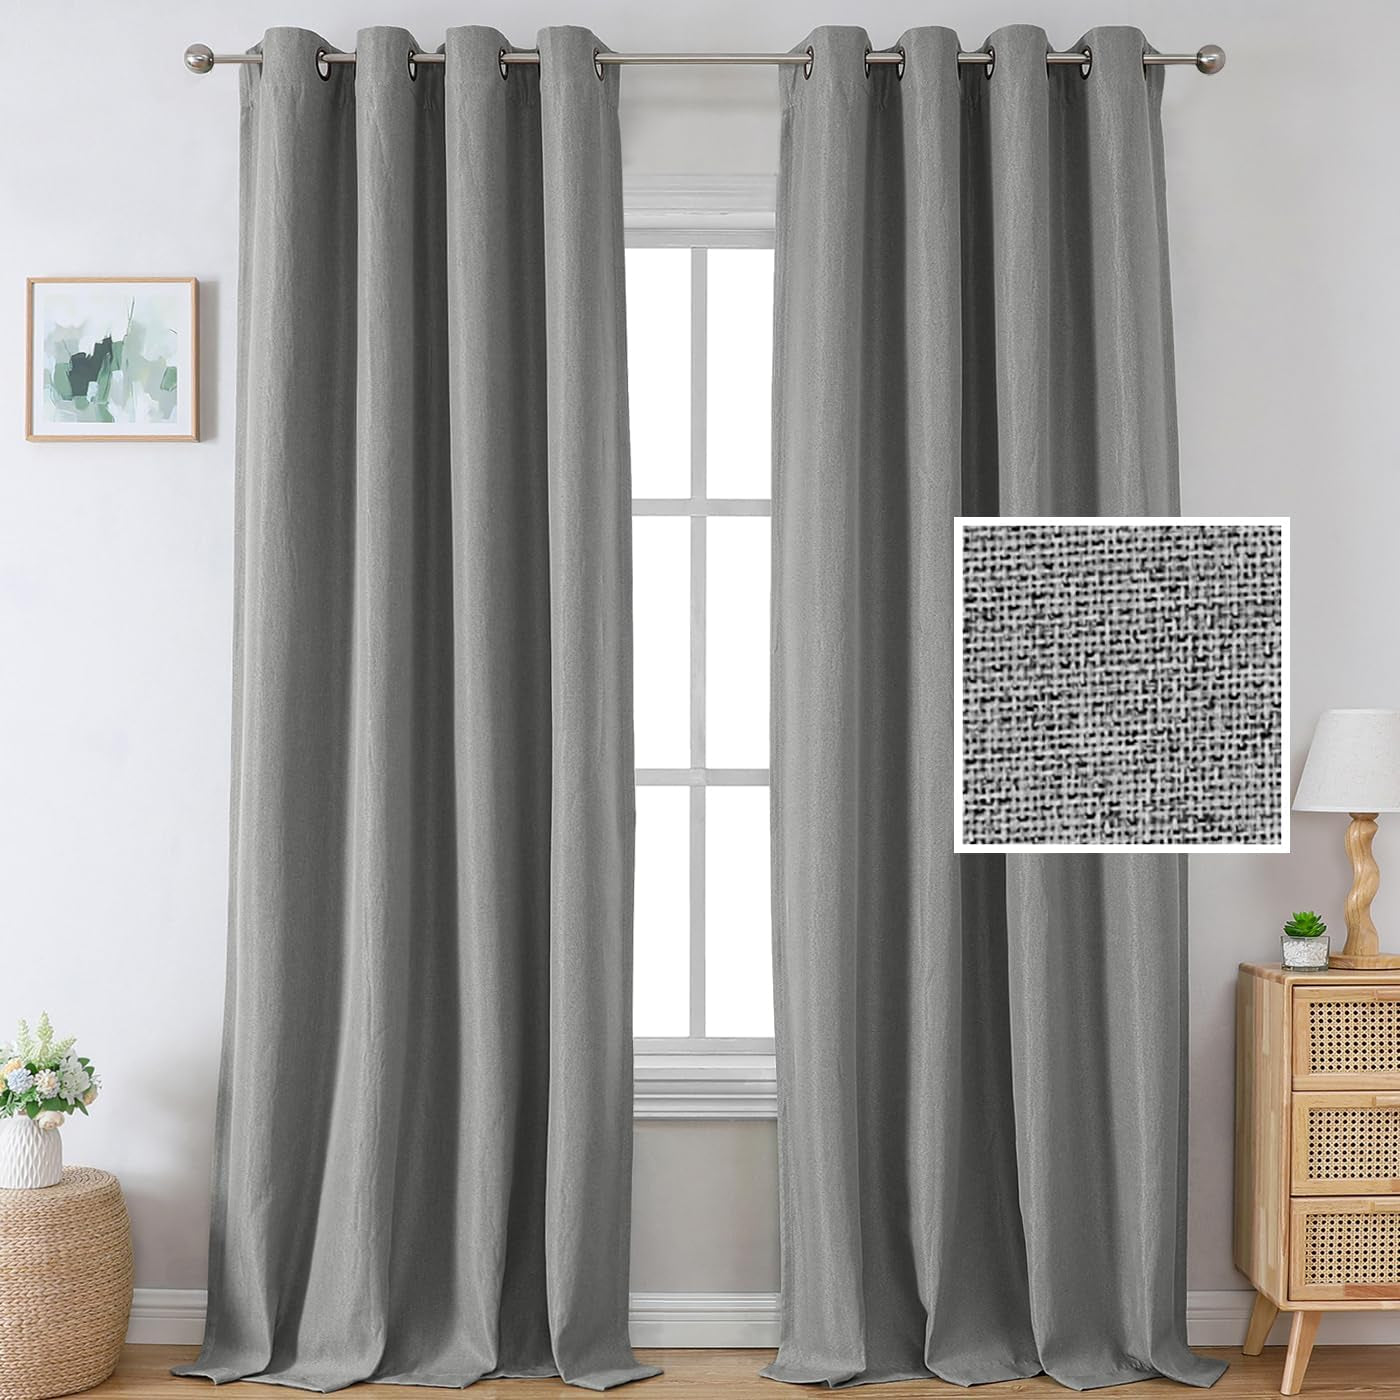 H.VERSAILTEX Linen Blackout Curtains 84 Inches Long Thermal Insulated Room Darkening Linen Curtains for Bedroom Textured Burlap Grommet Window Curtains for Living Room, Bluestone and Taupe, 2 Panels  H.VERSAILTEX Grey 52"W X 96"L 